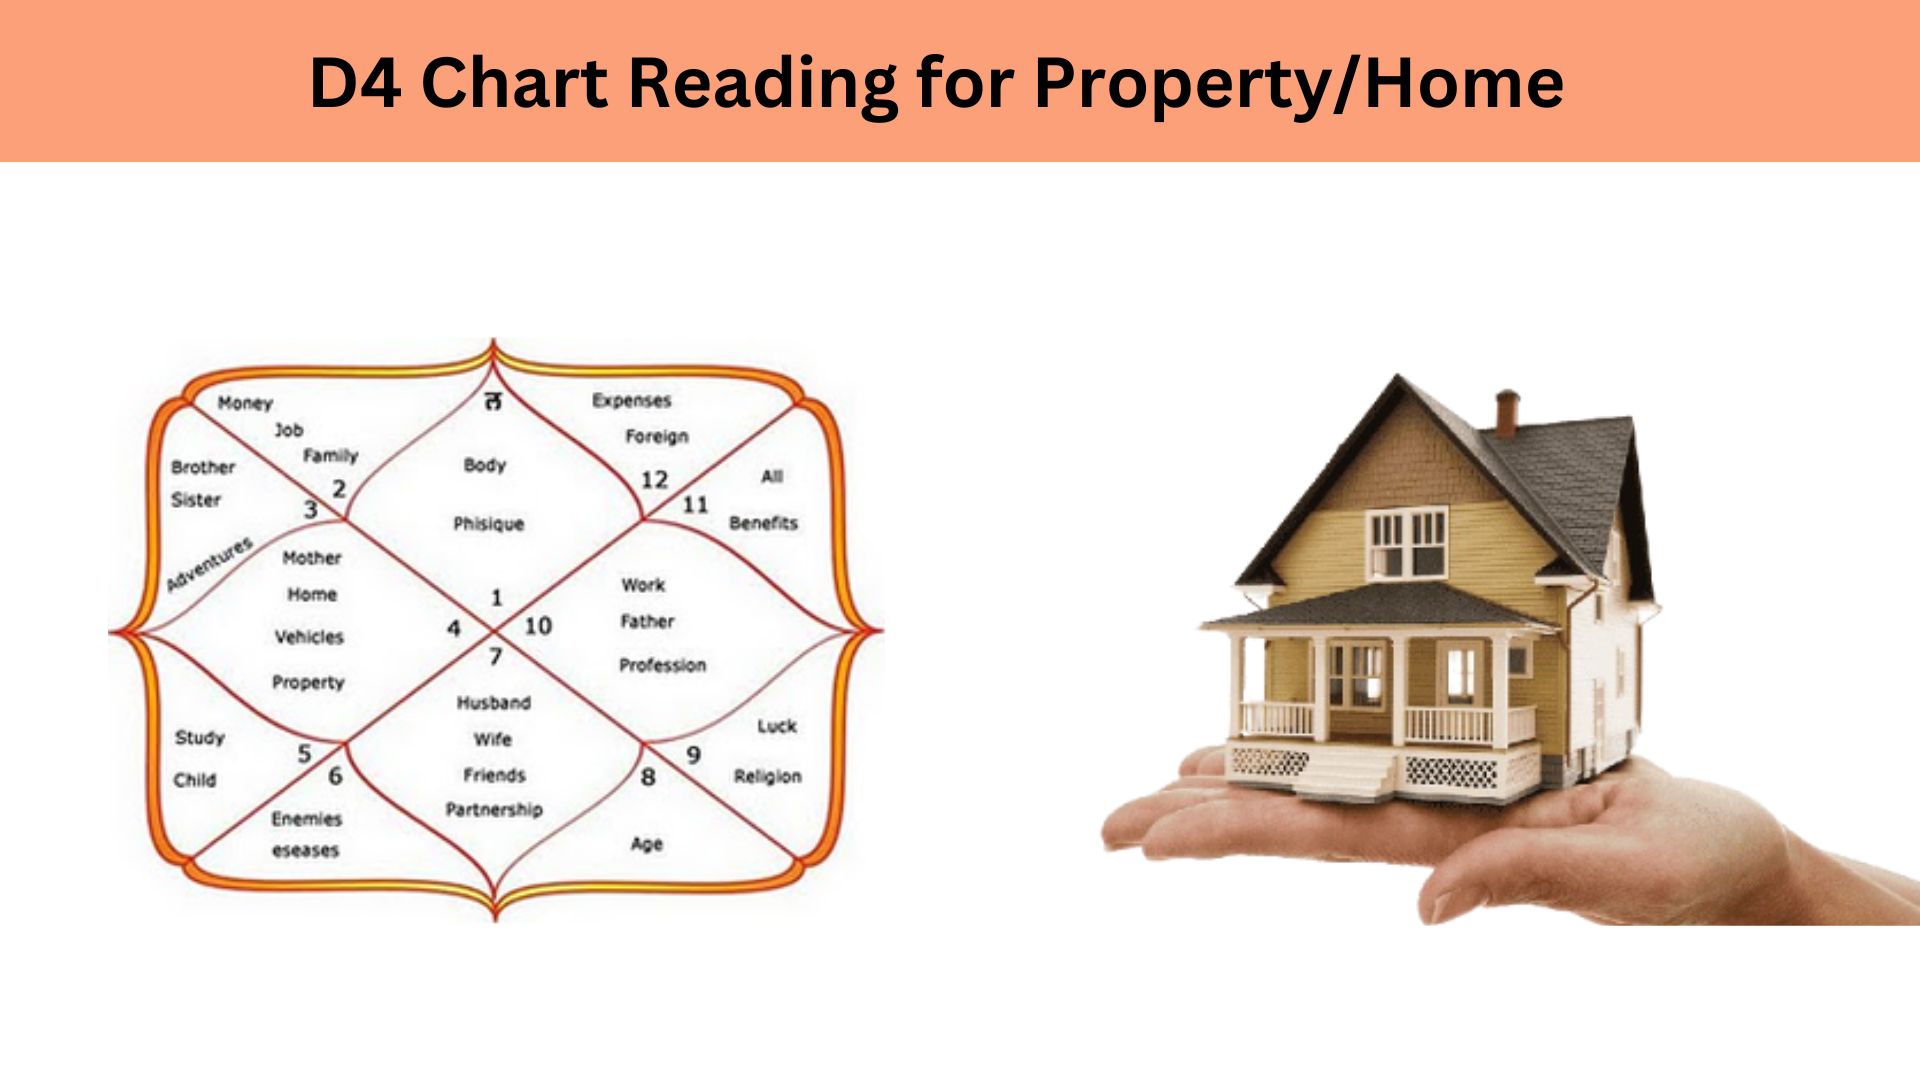 D4 Chart Reading for Property/Home